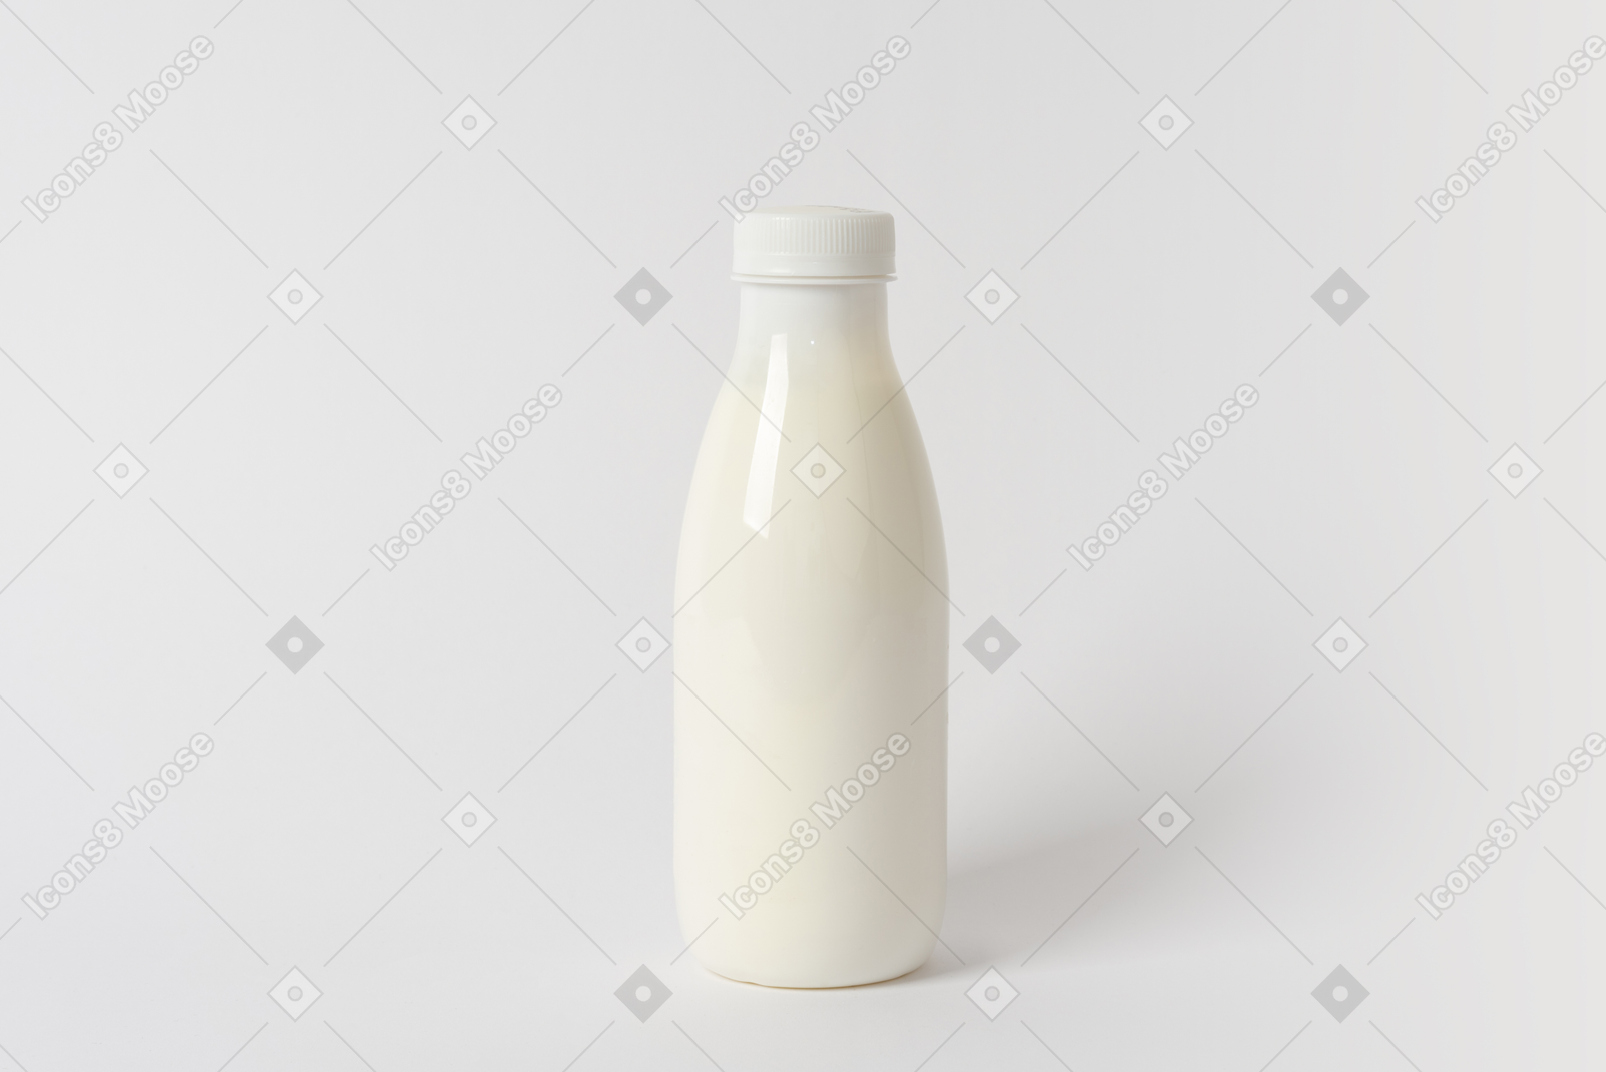 Small plastic bottle with some dairy product inside